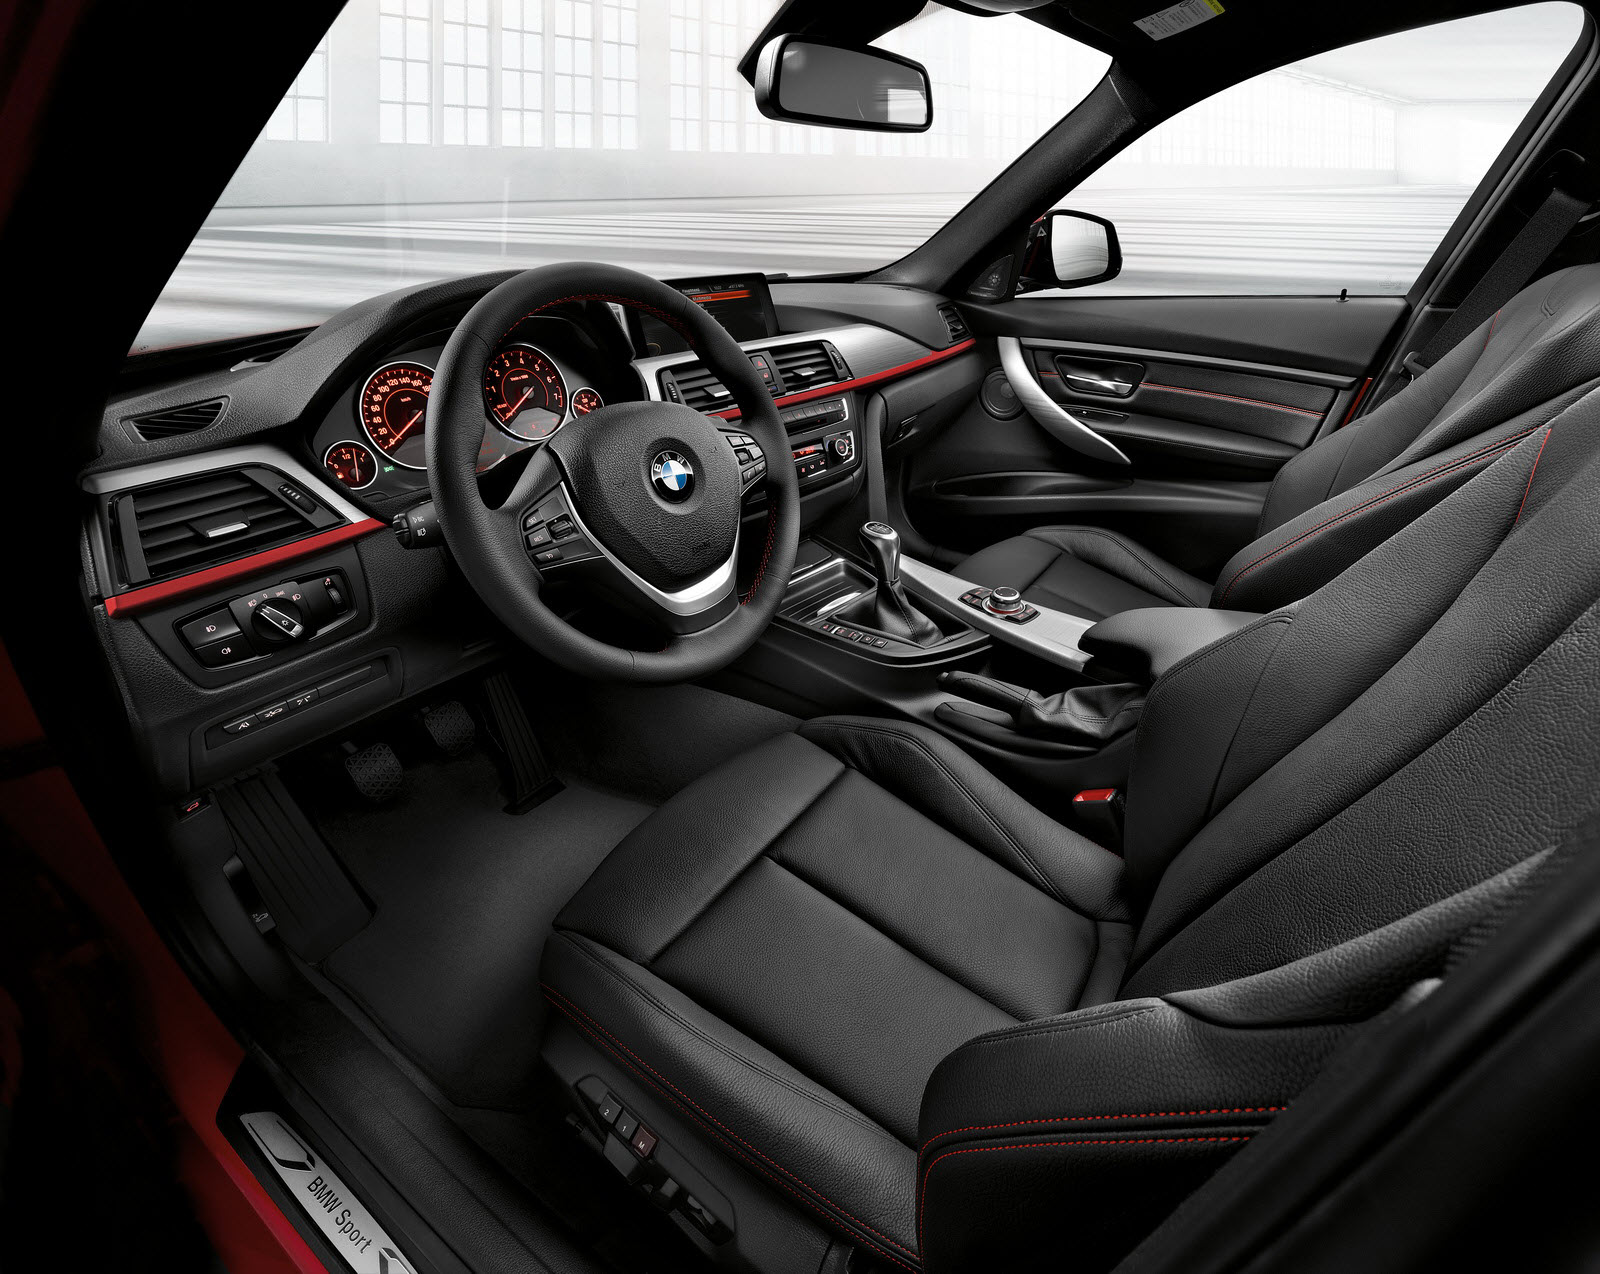 The new BMW 3 Series Touring   Auto Car   Best Car News and Reviews